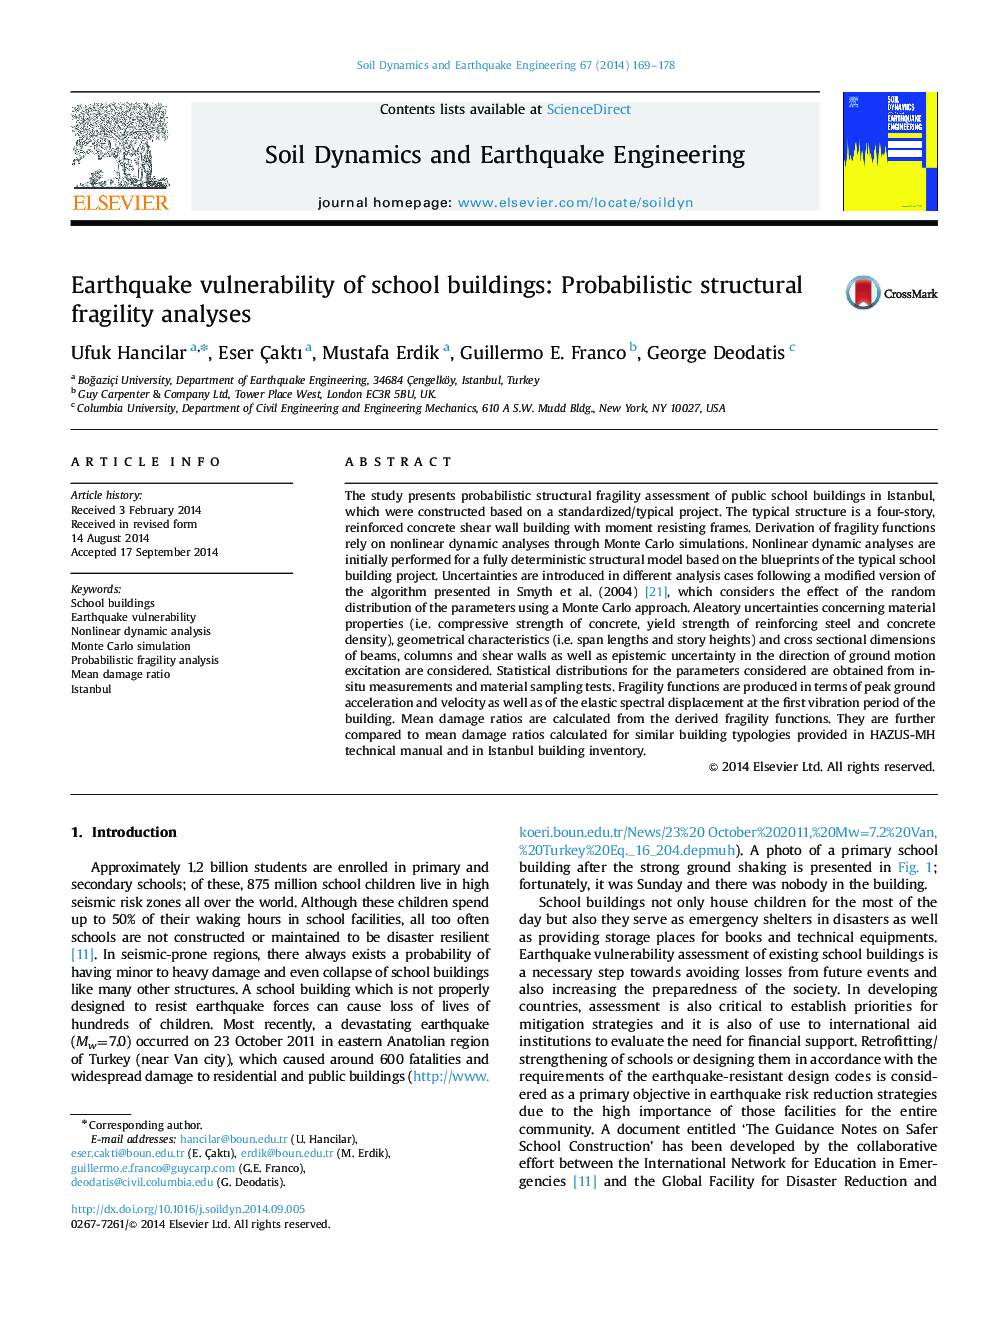 Earthquake vulnerability of school buildings: Probabilistic structural fragility analyses